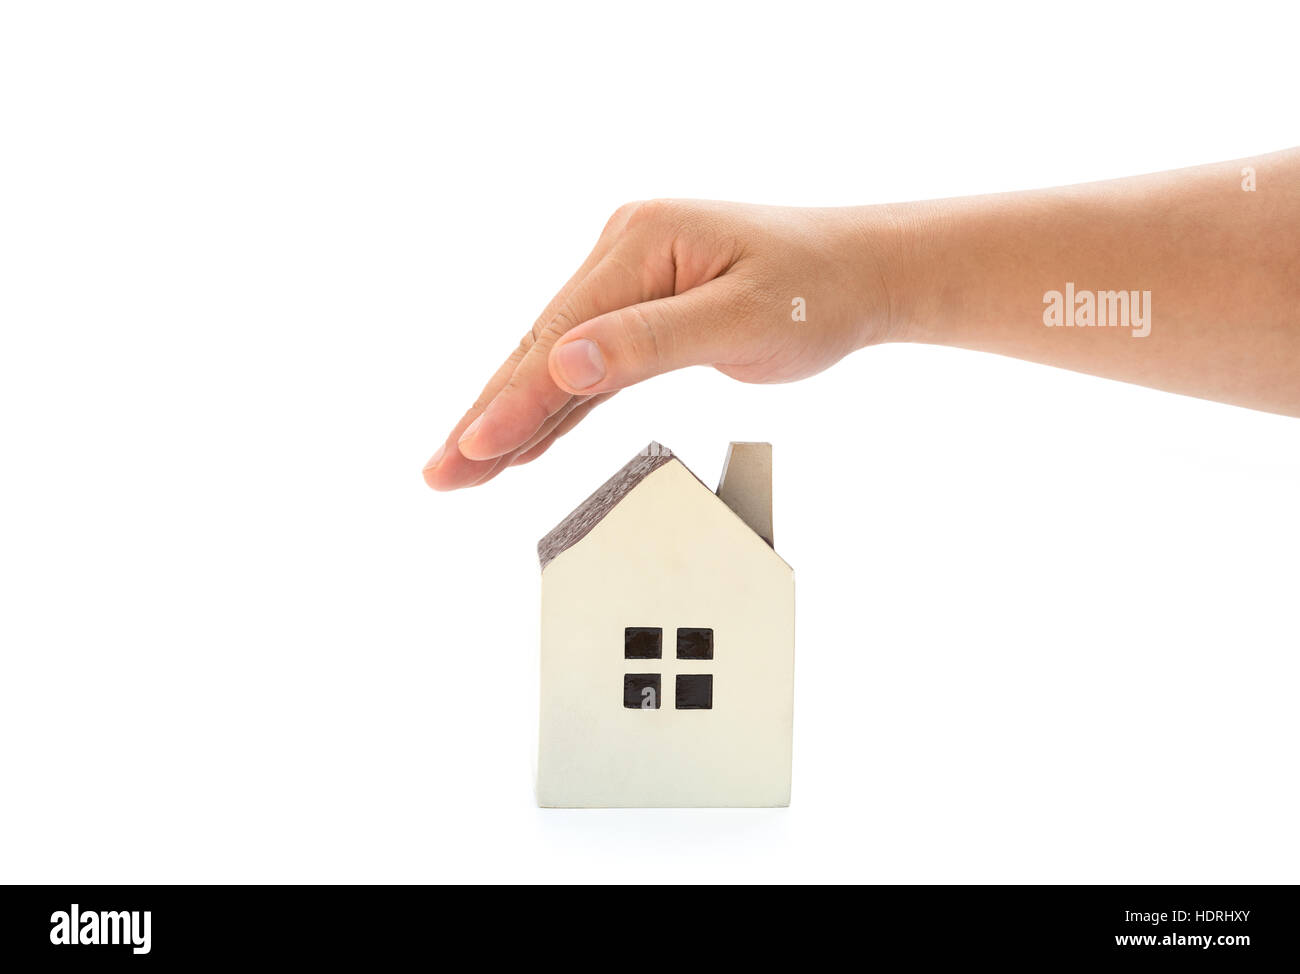 right hand covering a small family house with clipping path, home insurance concept or representing home ownership Stock Photo